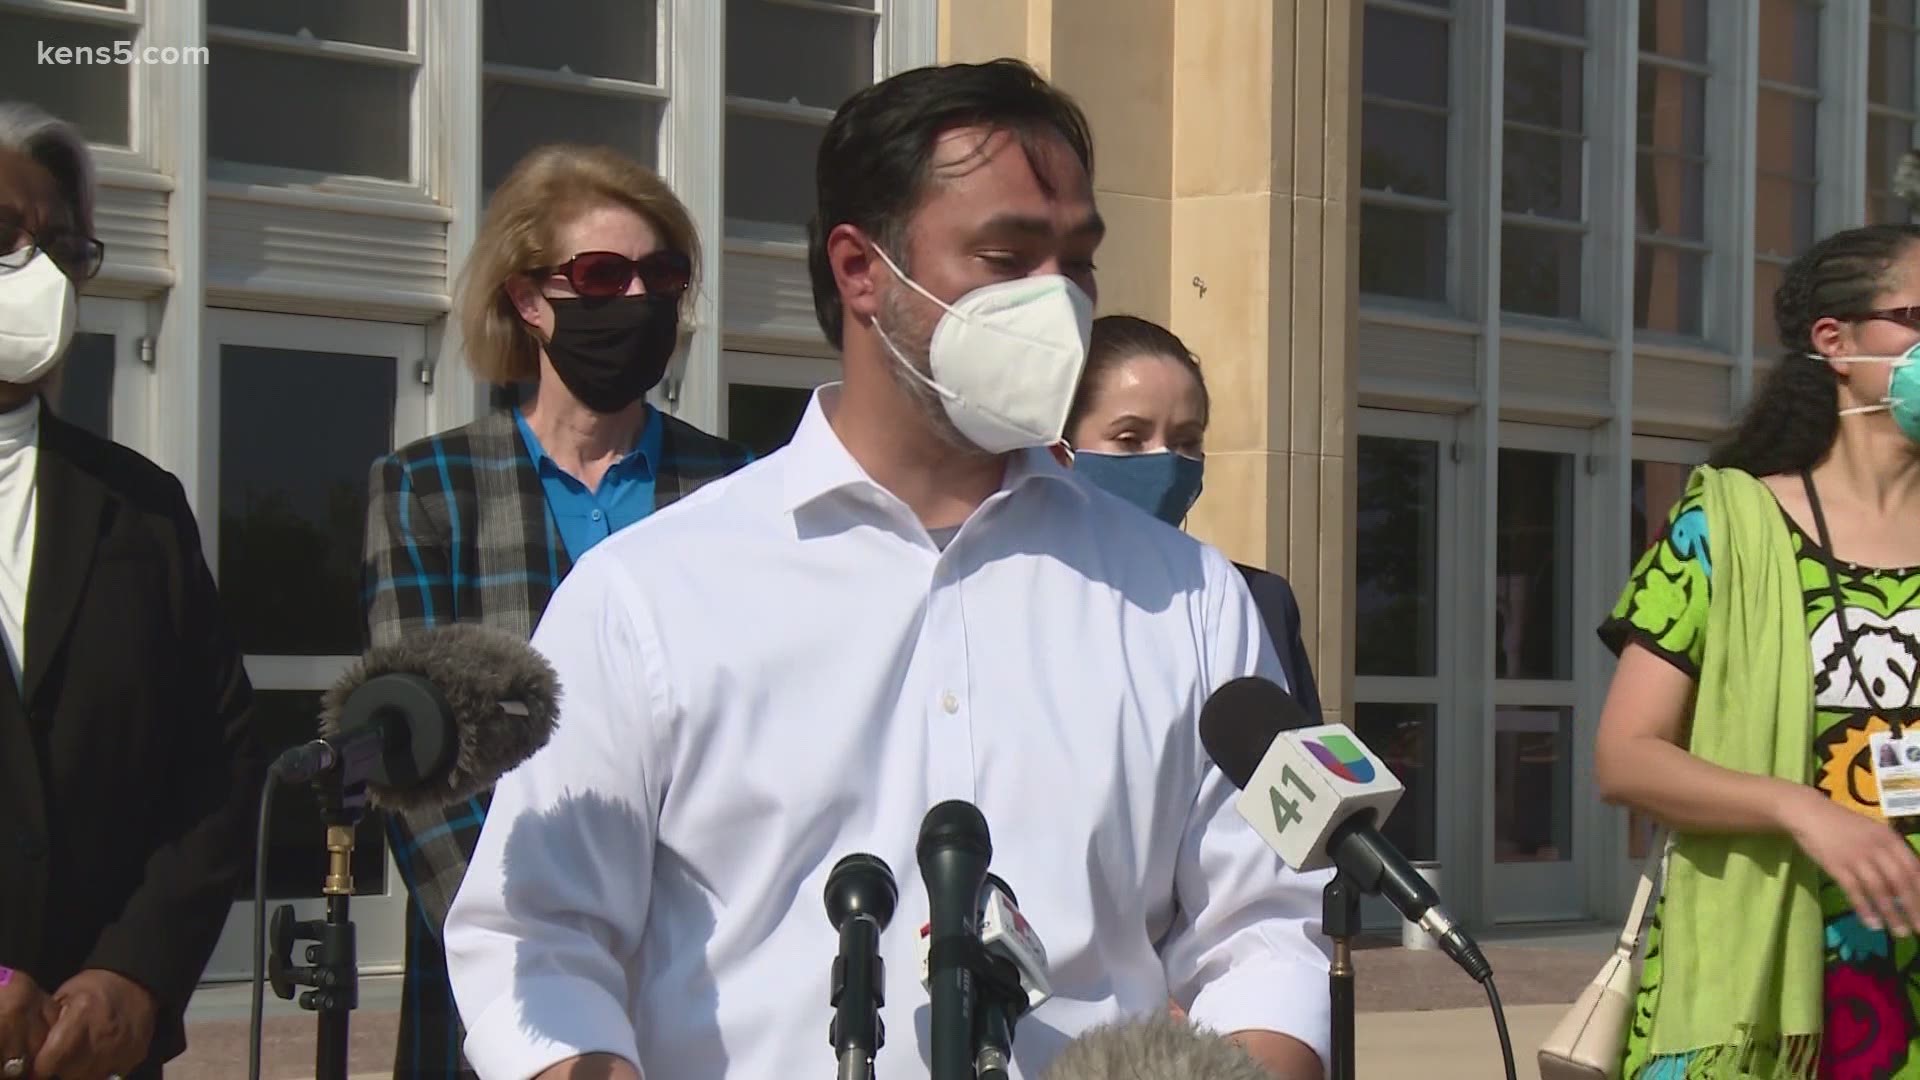 The delegation was led by Congressman Joaquin Castro, who urged Gov. Abbott to present any evidence the state had concerning alleged mistreatment at intake site.